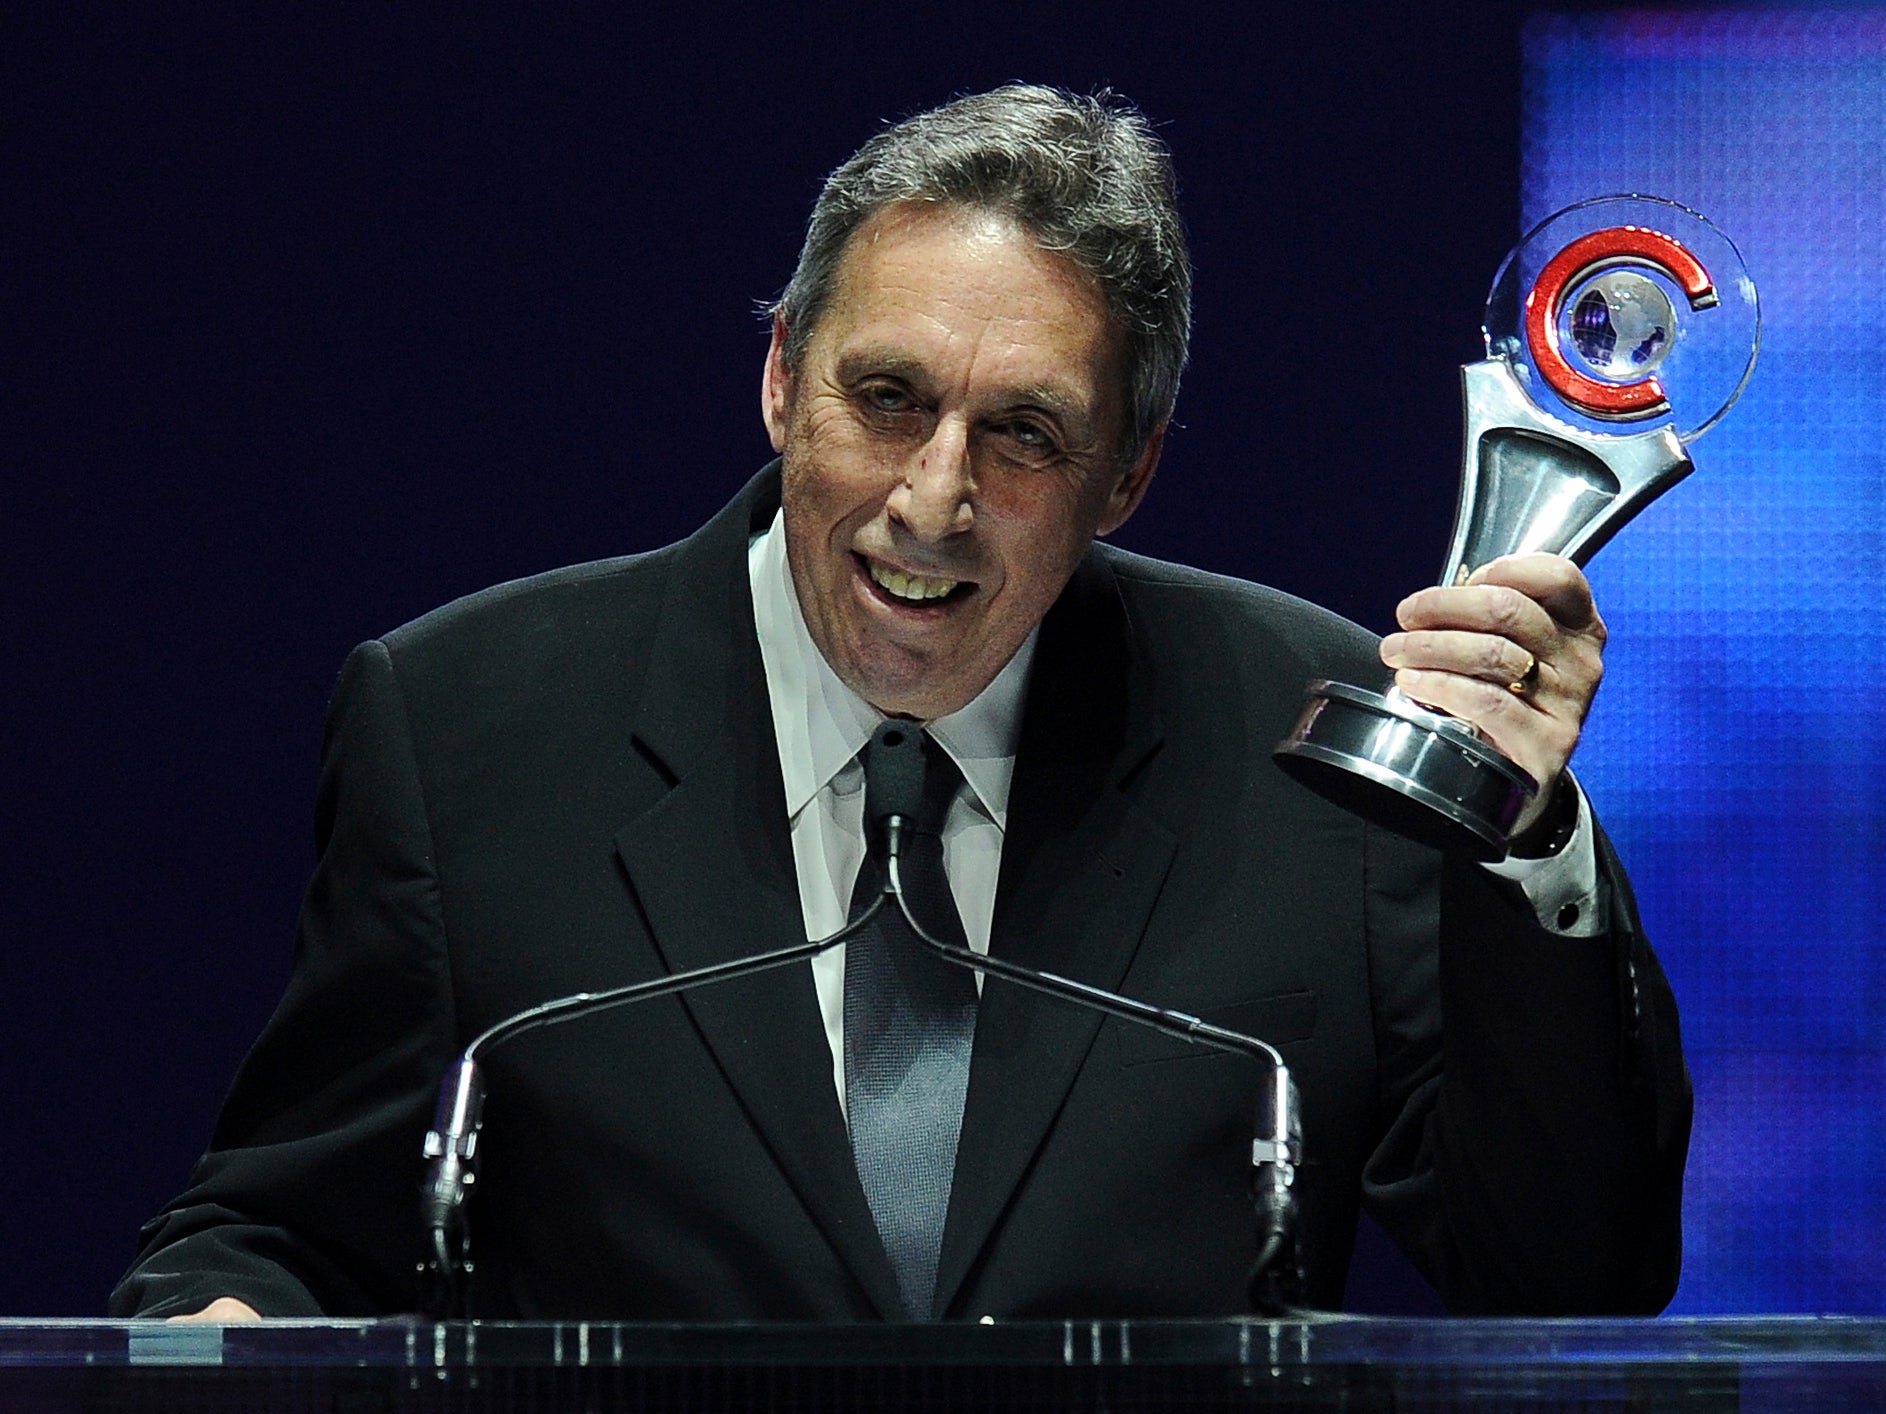 Accepting the Lifetime Achievement Award at CinemaCon 2014 in Las Vegas